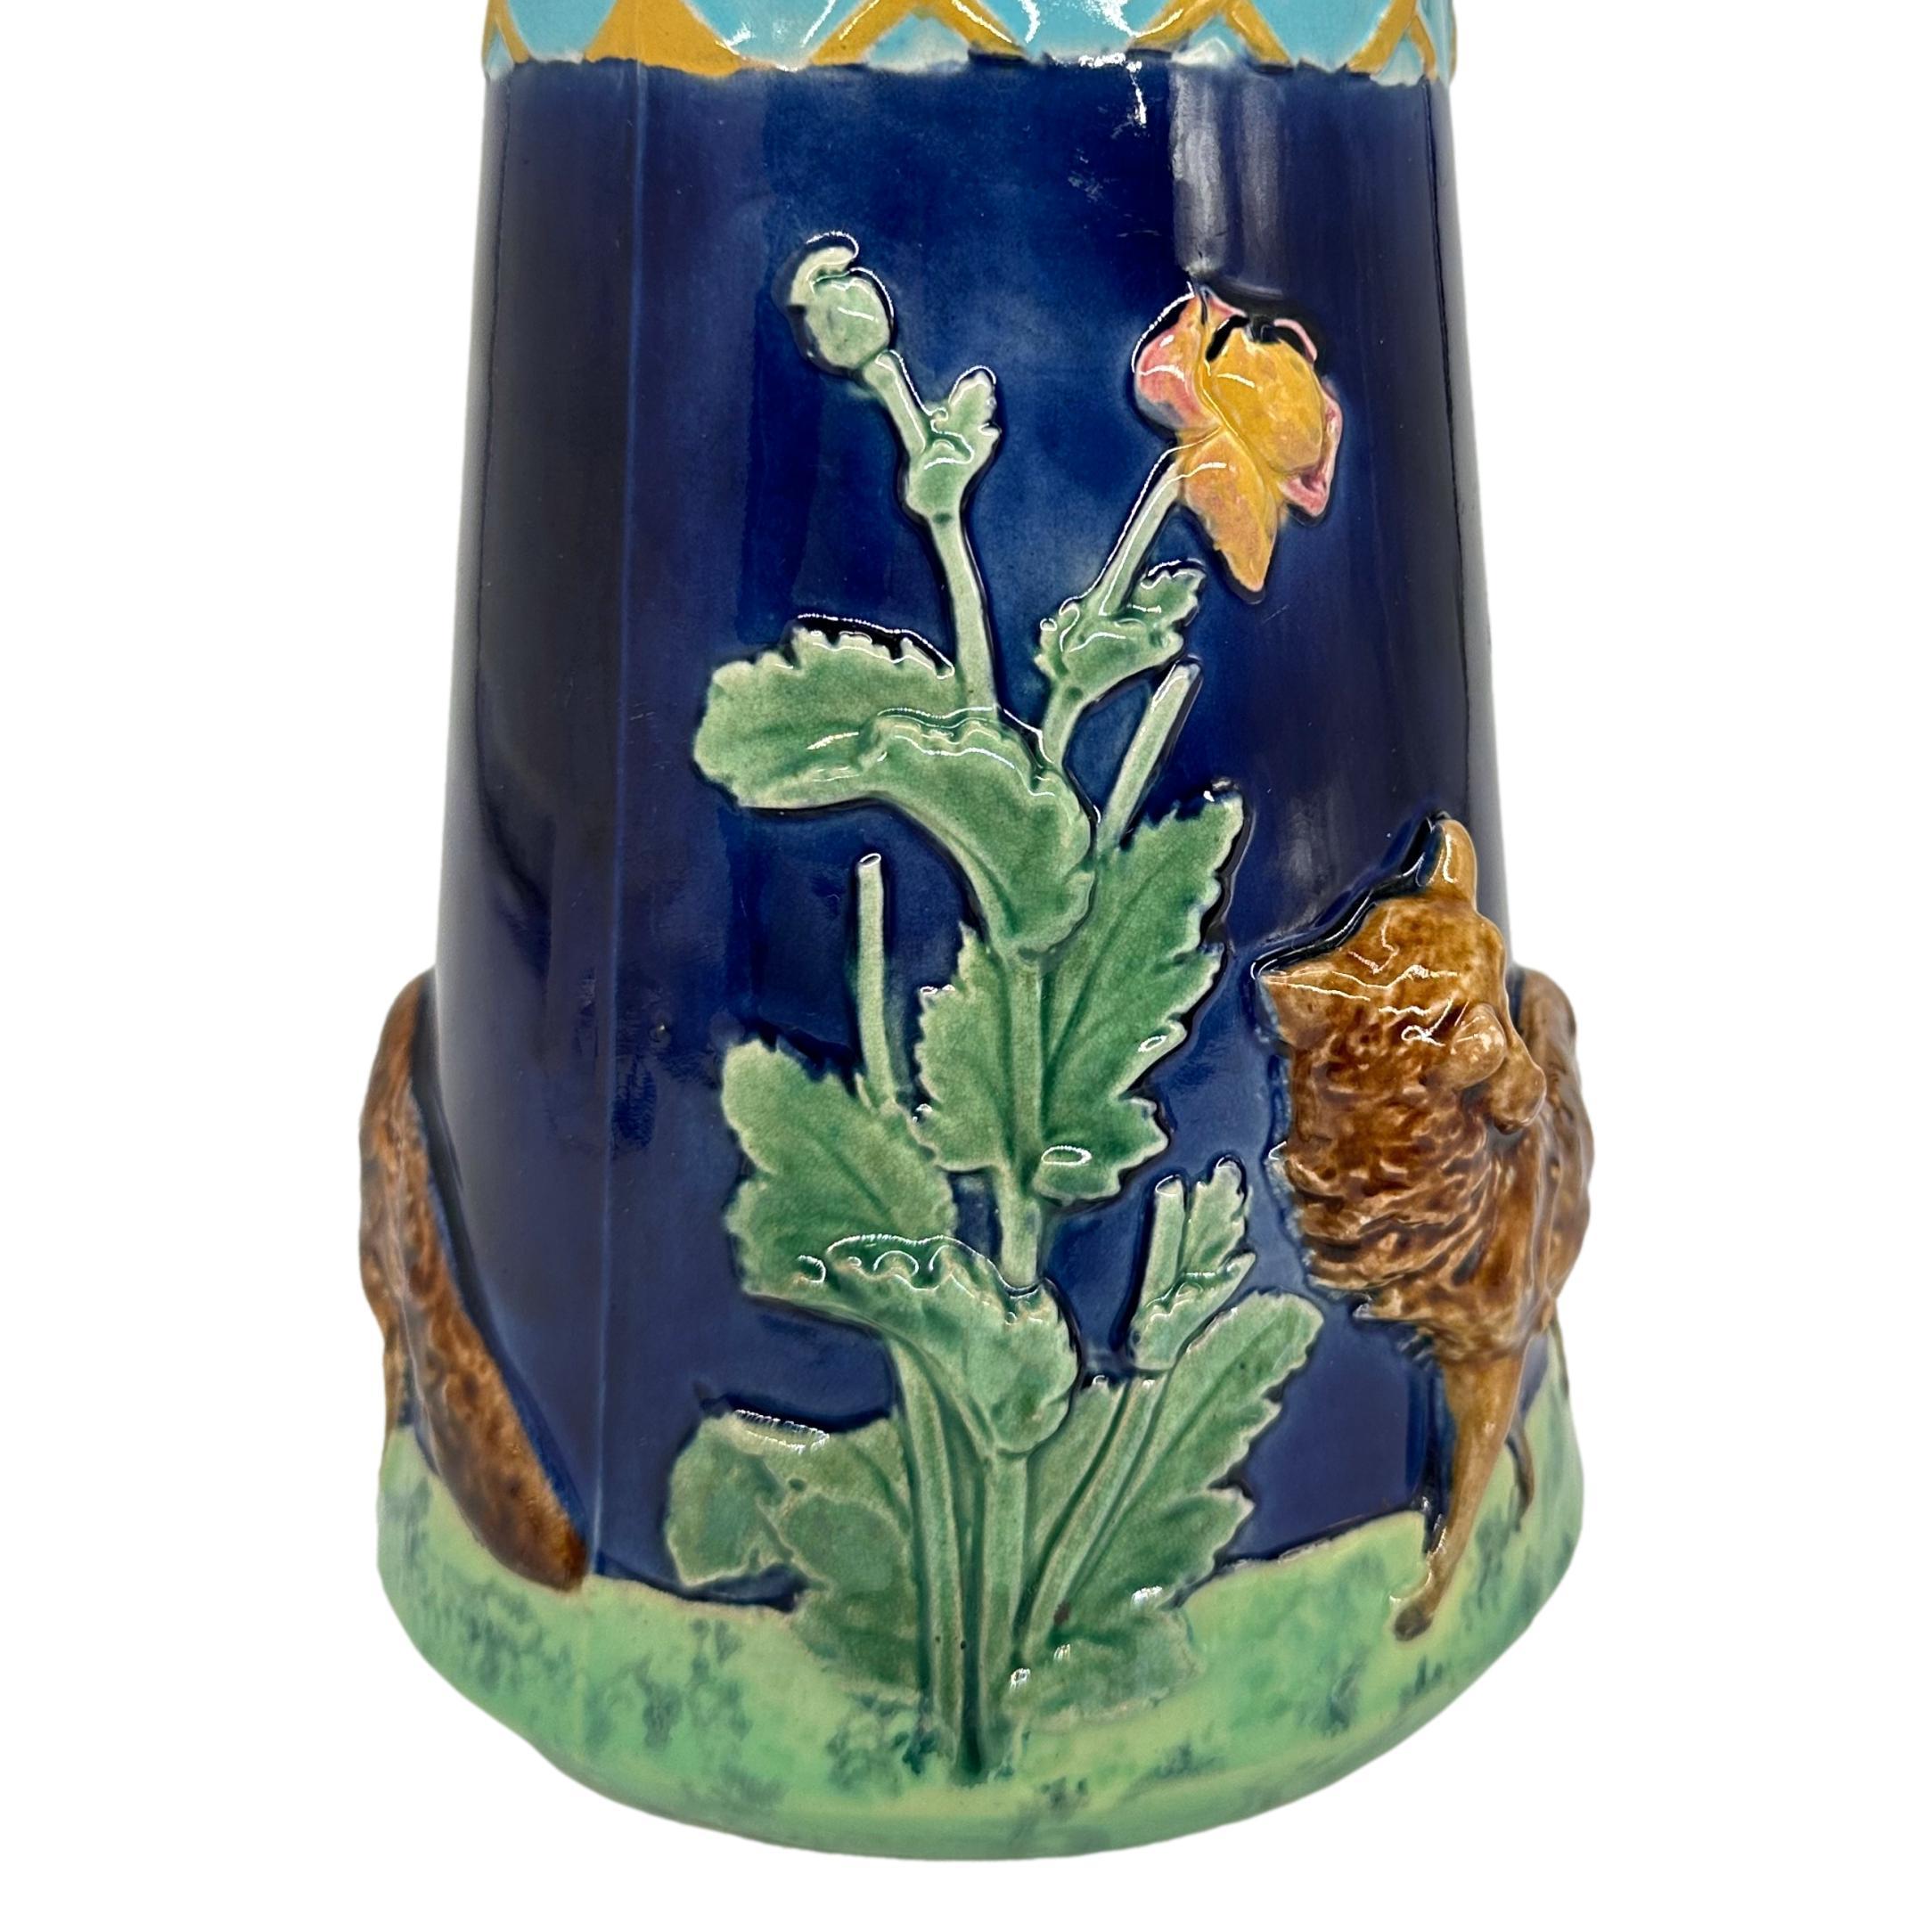 Late 19th Century A BWM Majolica Jug Depicting 'The Fox and the Grapers' Aesop's Fable, ca. 1876 For Sale